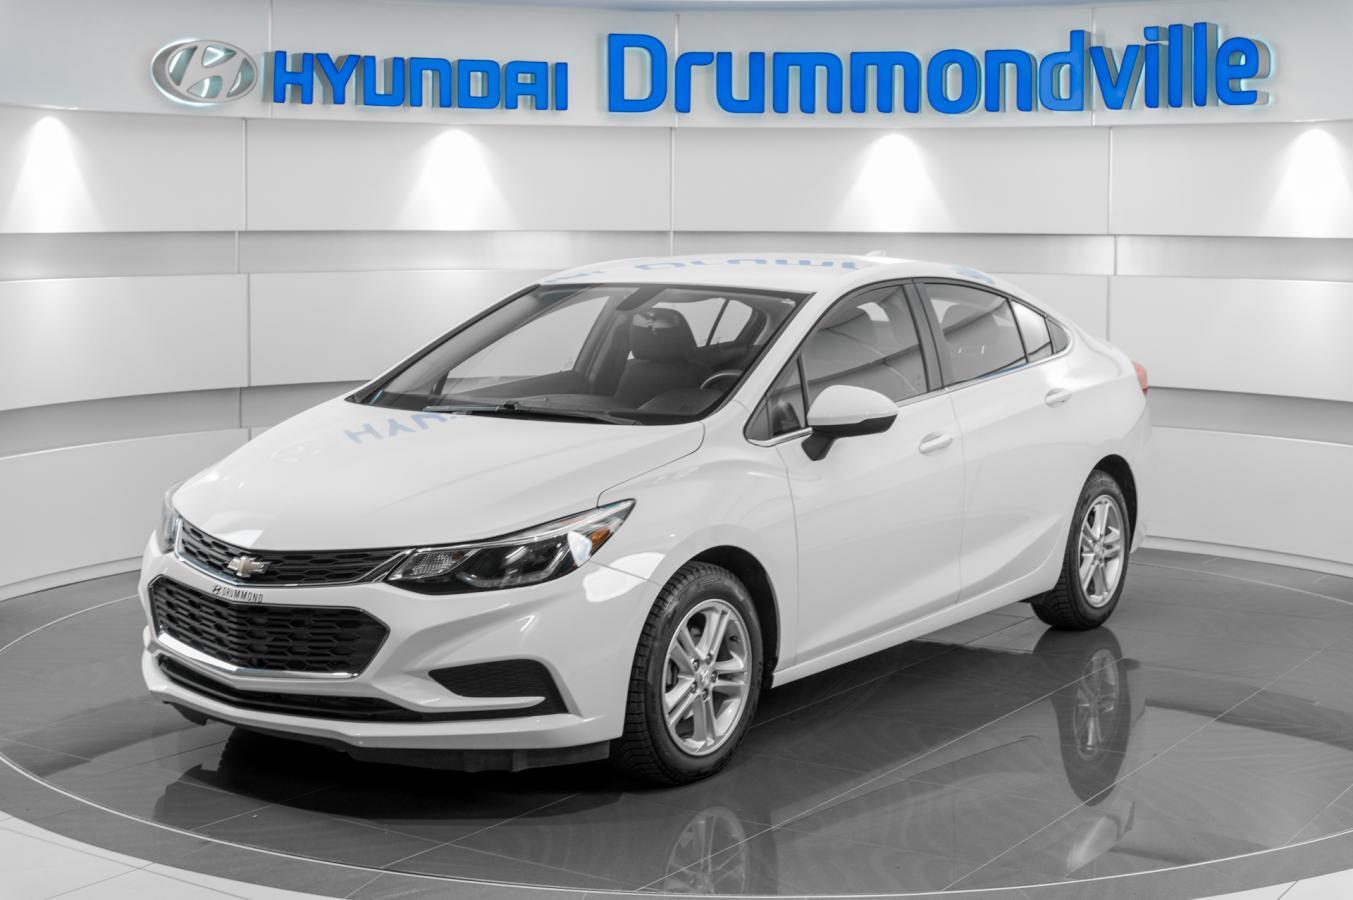 2018 Chevrolet Cruze LT + CAMERA + A/C + MAGS + CRUISE + WOW !!